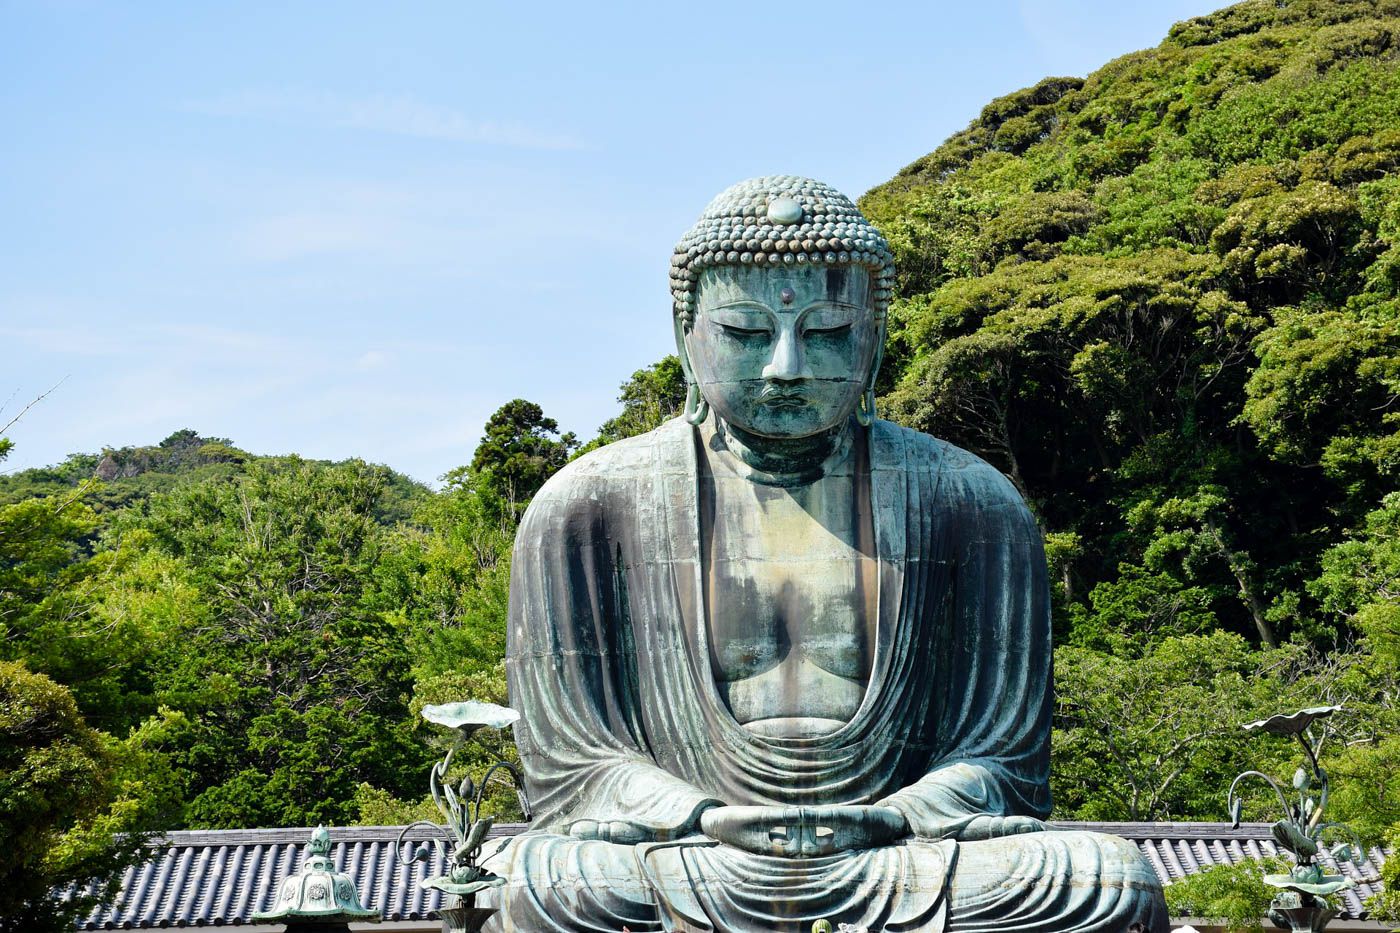 Kamakura Travel Costs & Prices - Beaches, Temples & Shrines, Hiking